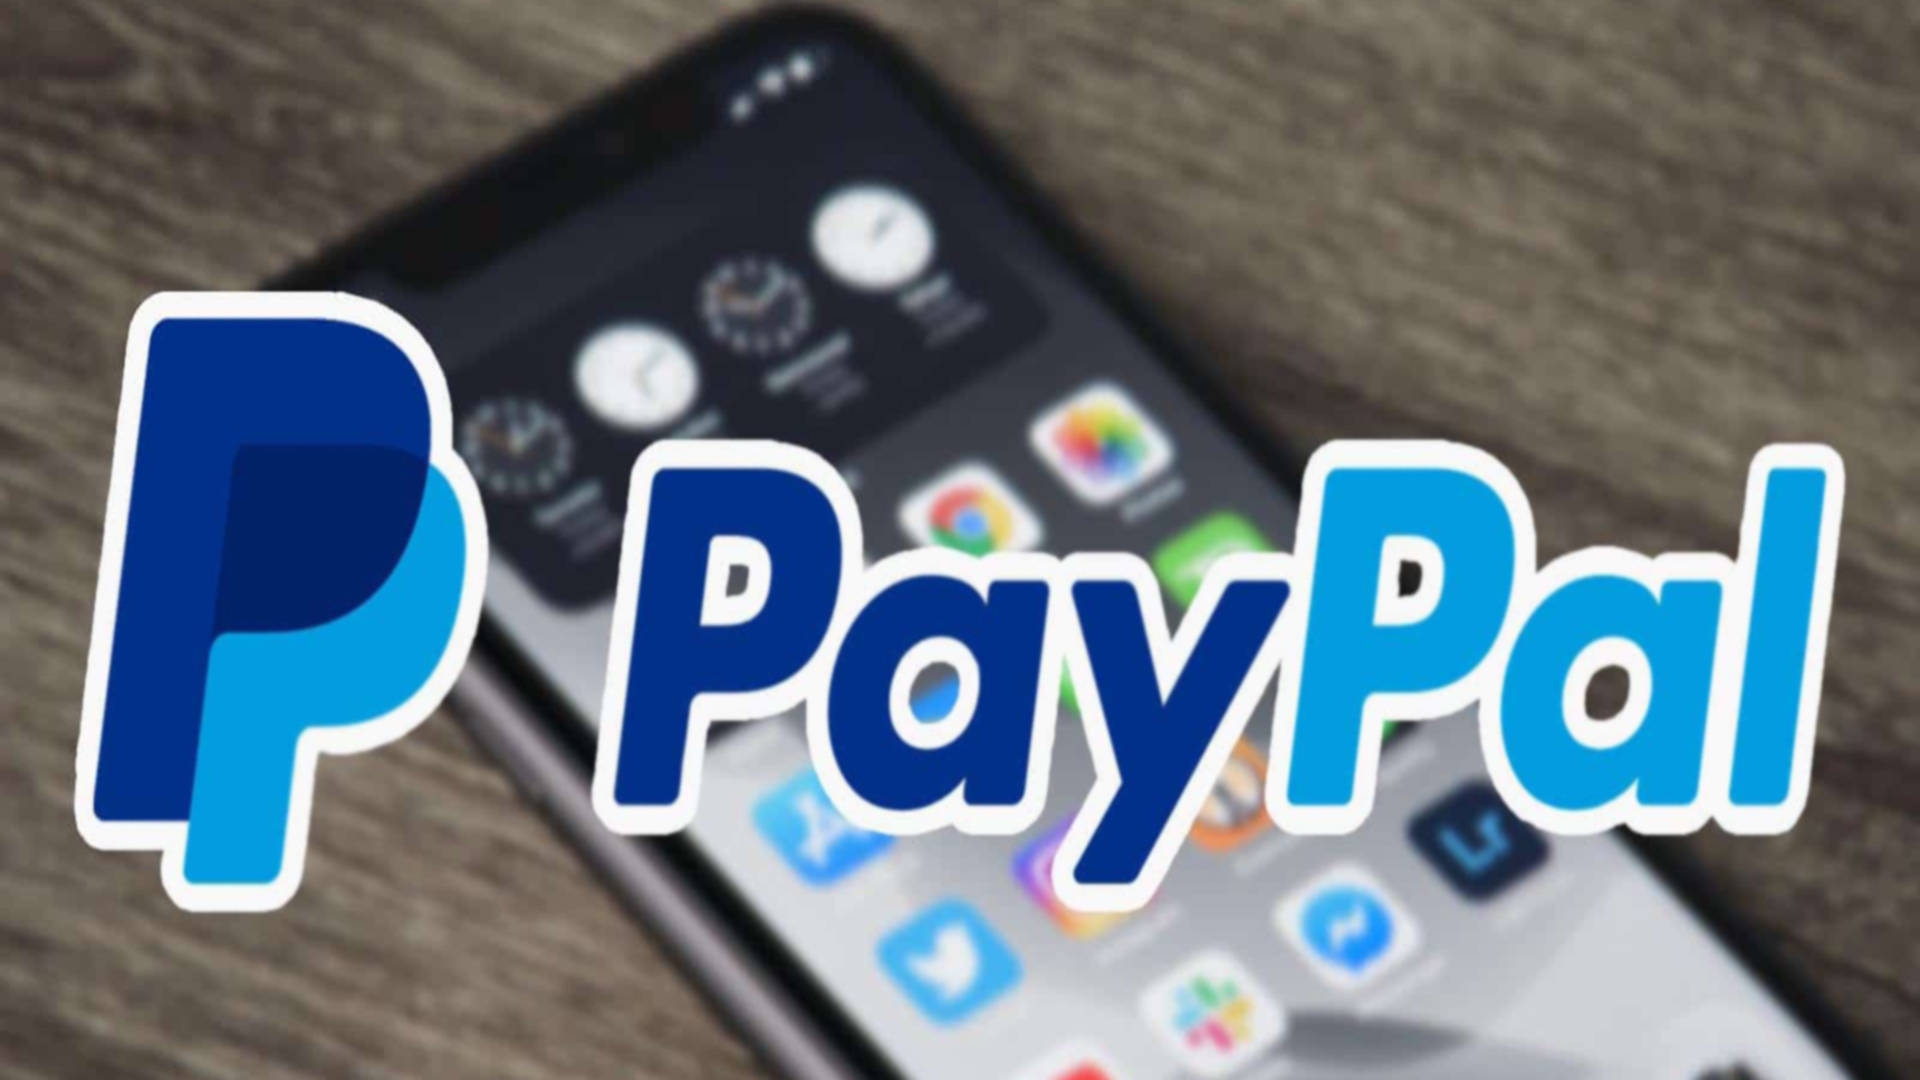 Paypal Logo With Phone Wallpaper